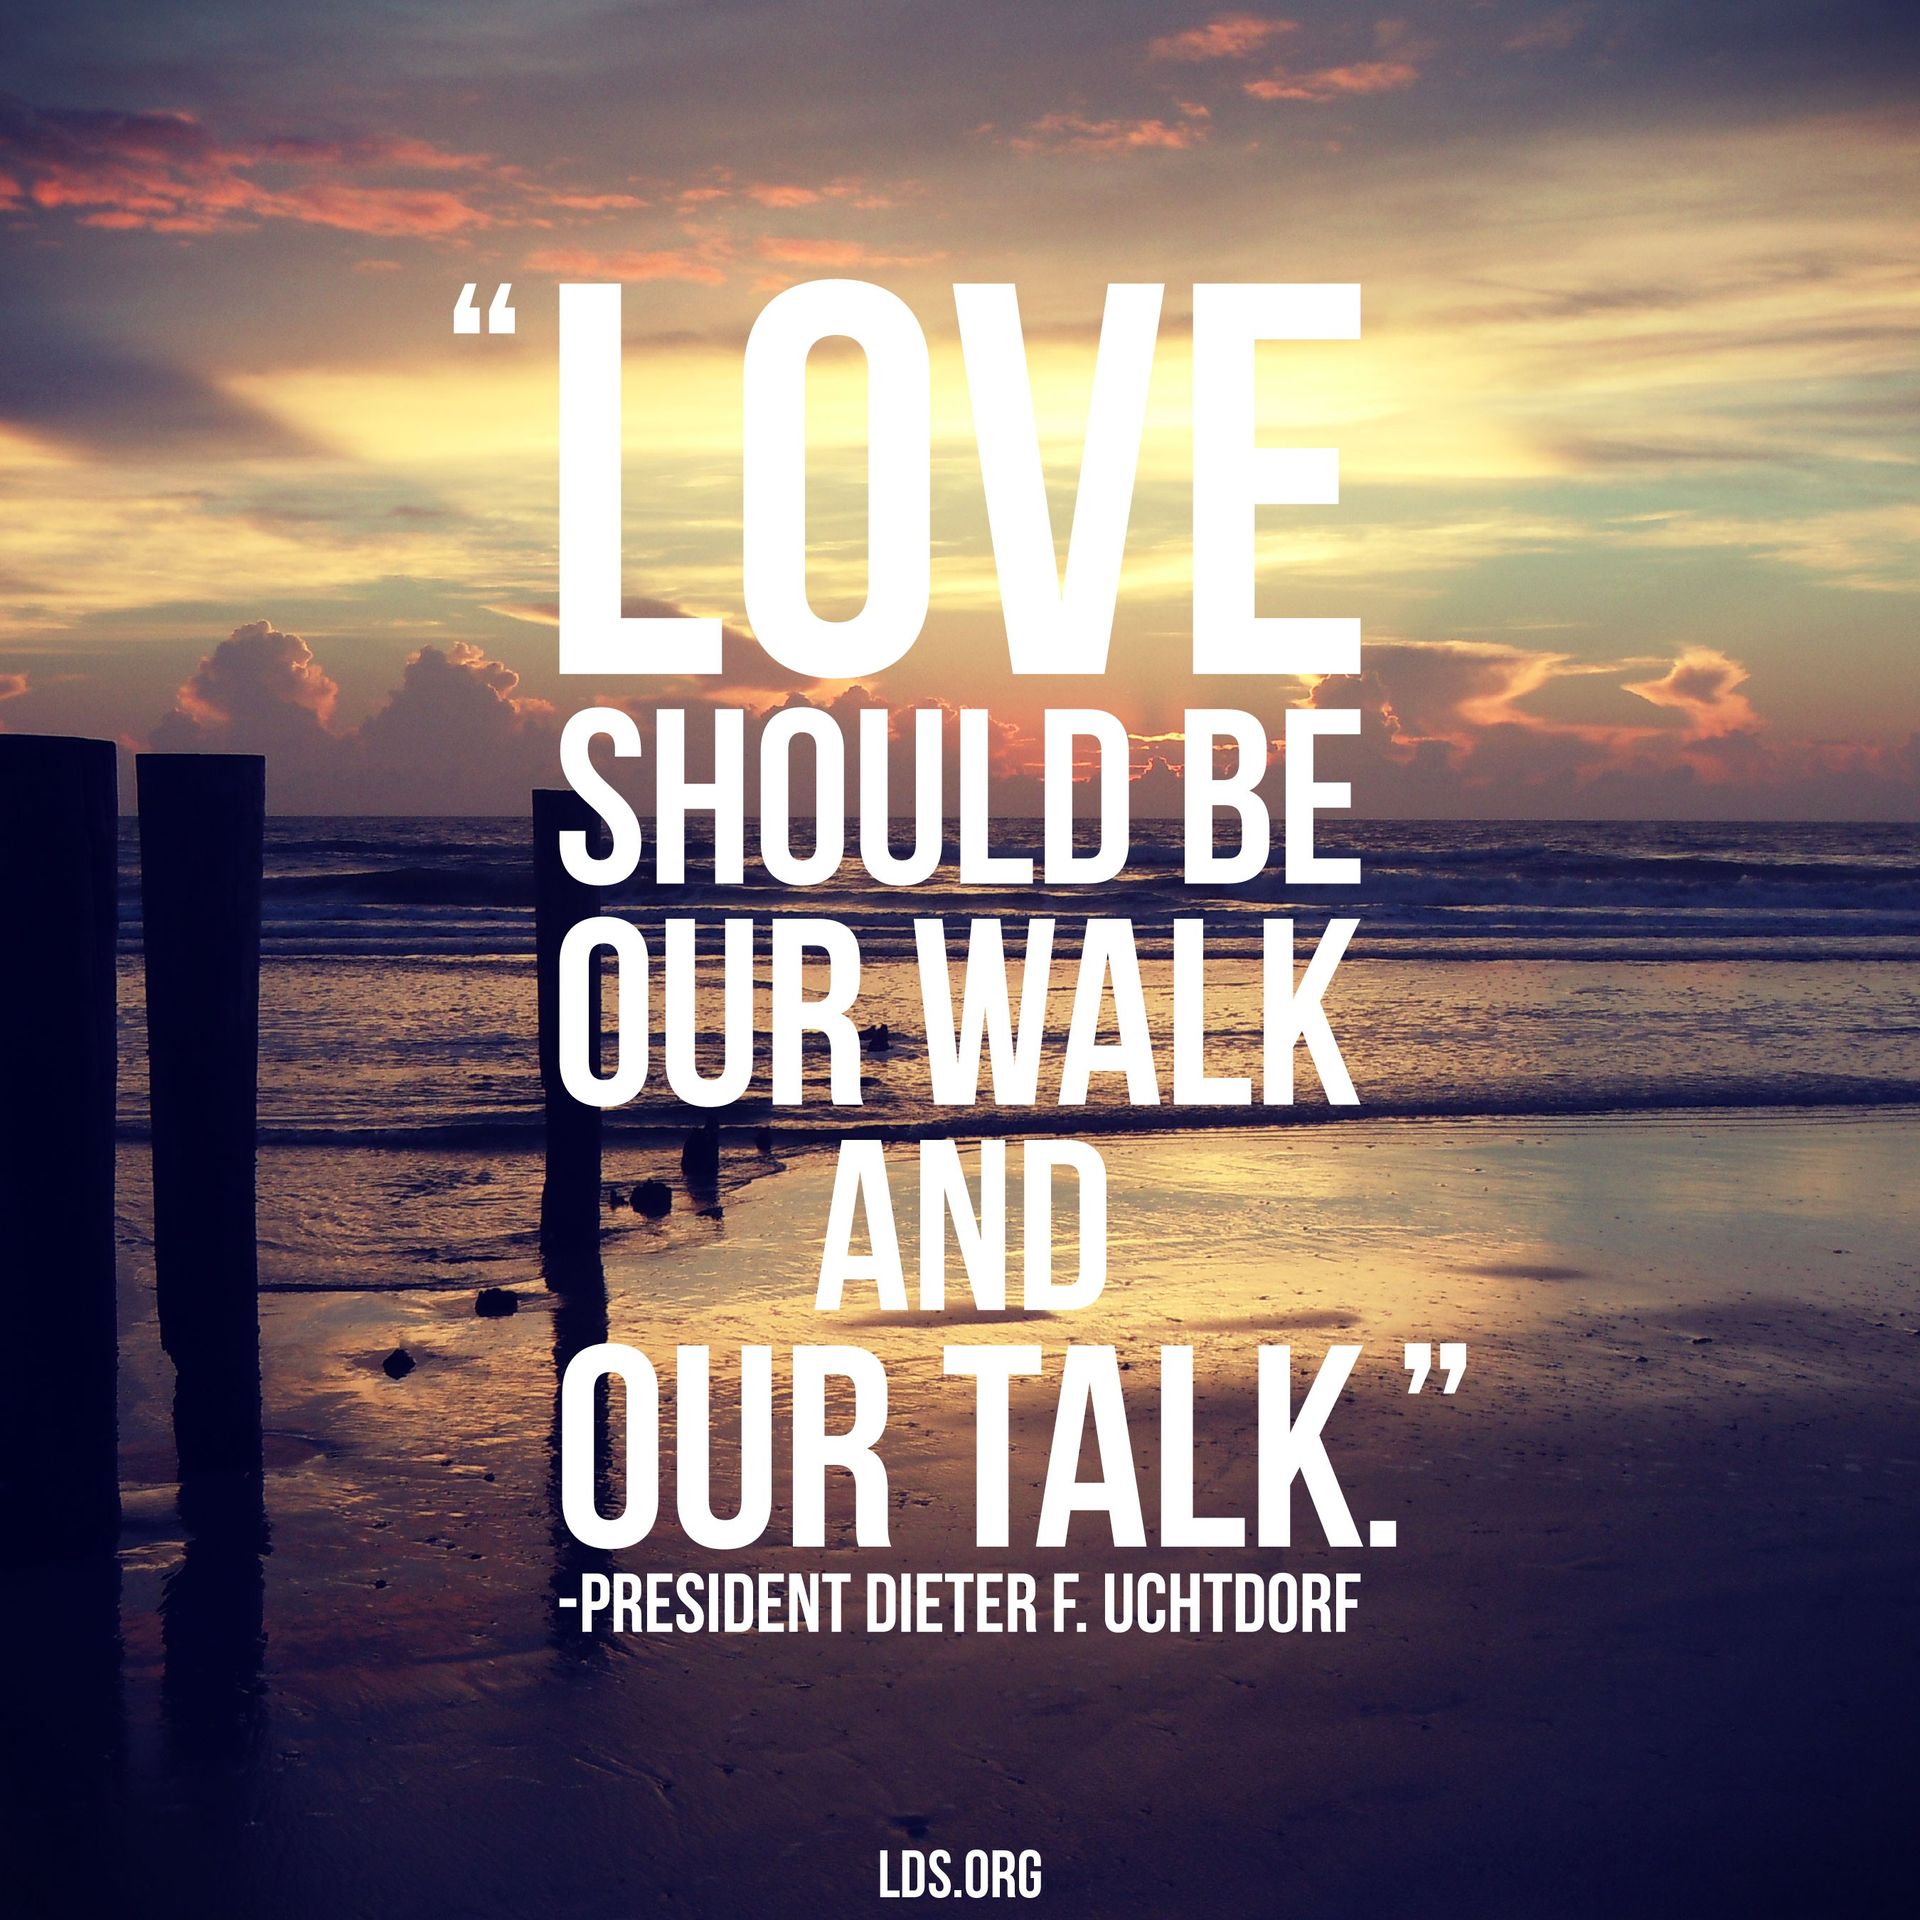 “Love should be our walk and our talk.”—President Dieter F. Uchtdorf, “The Love of God” © undefined ipCode 1.